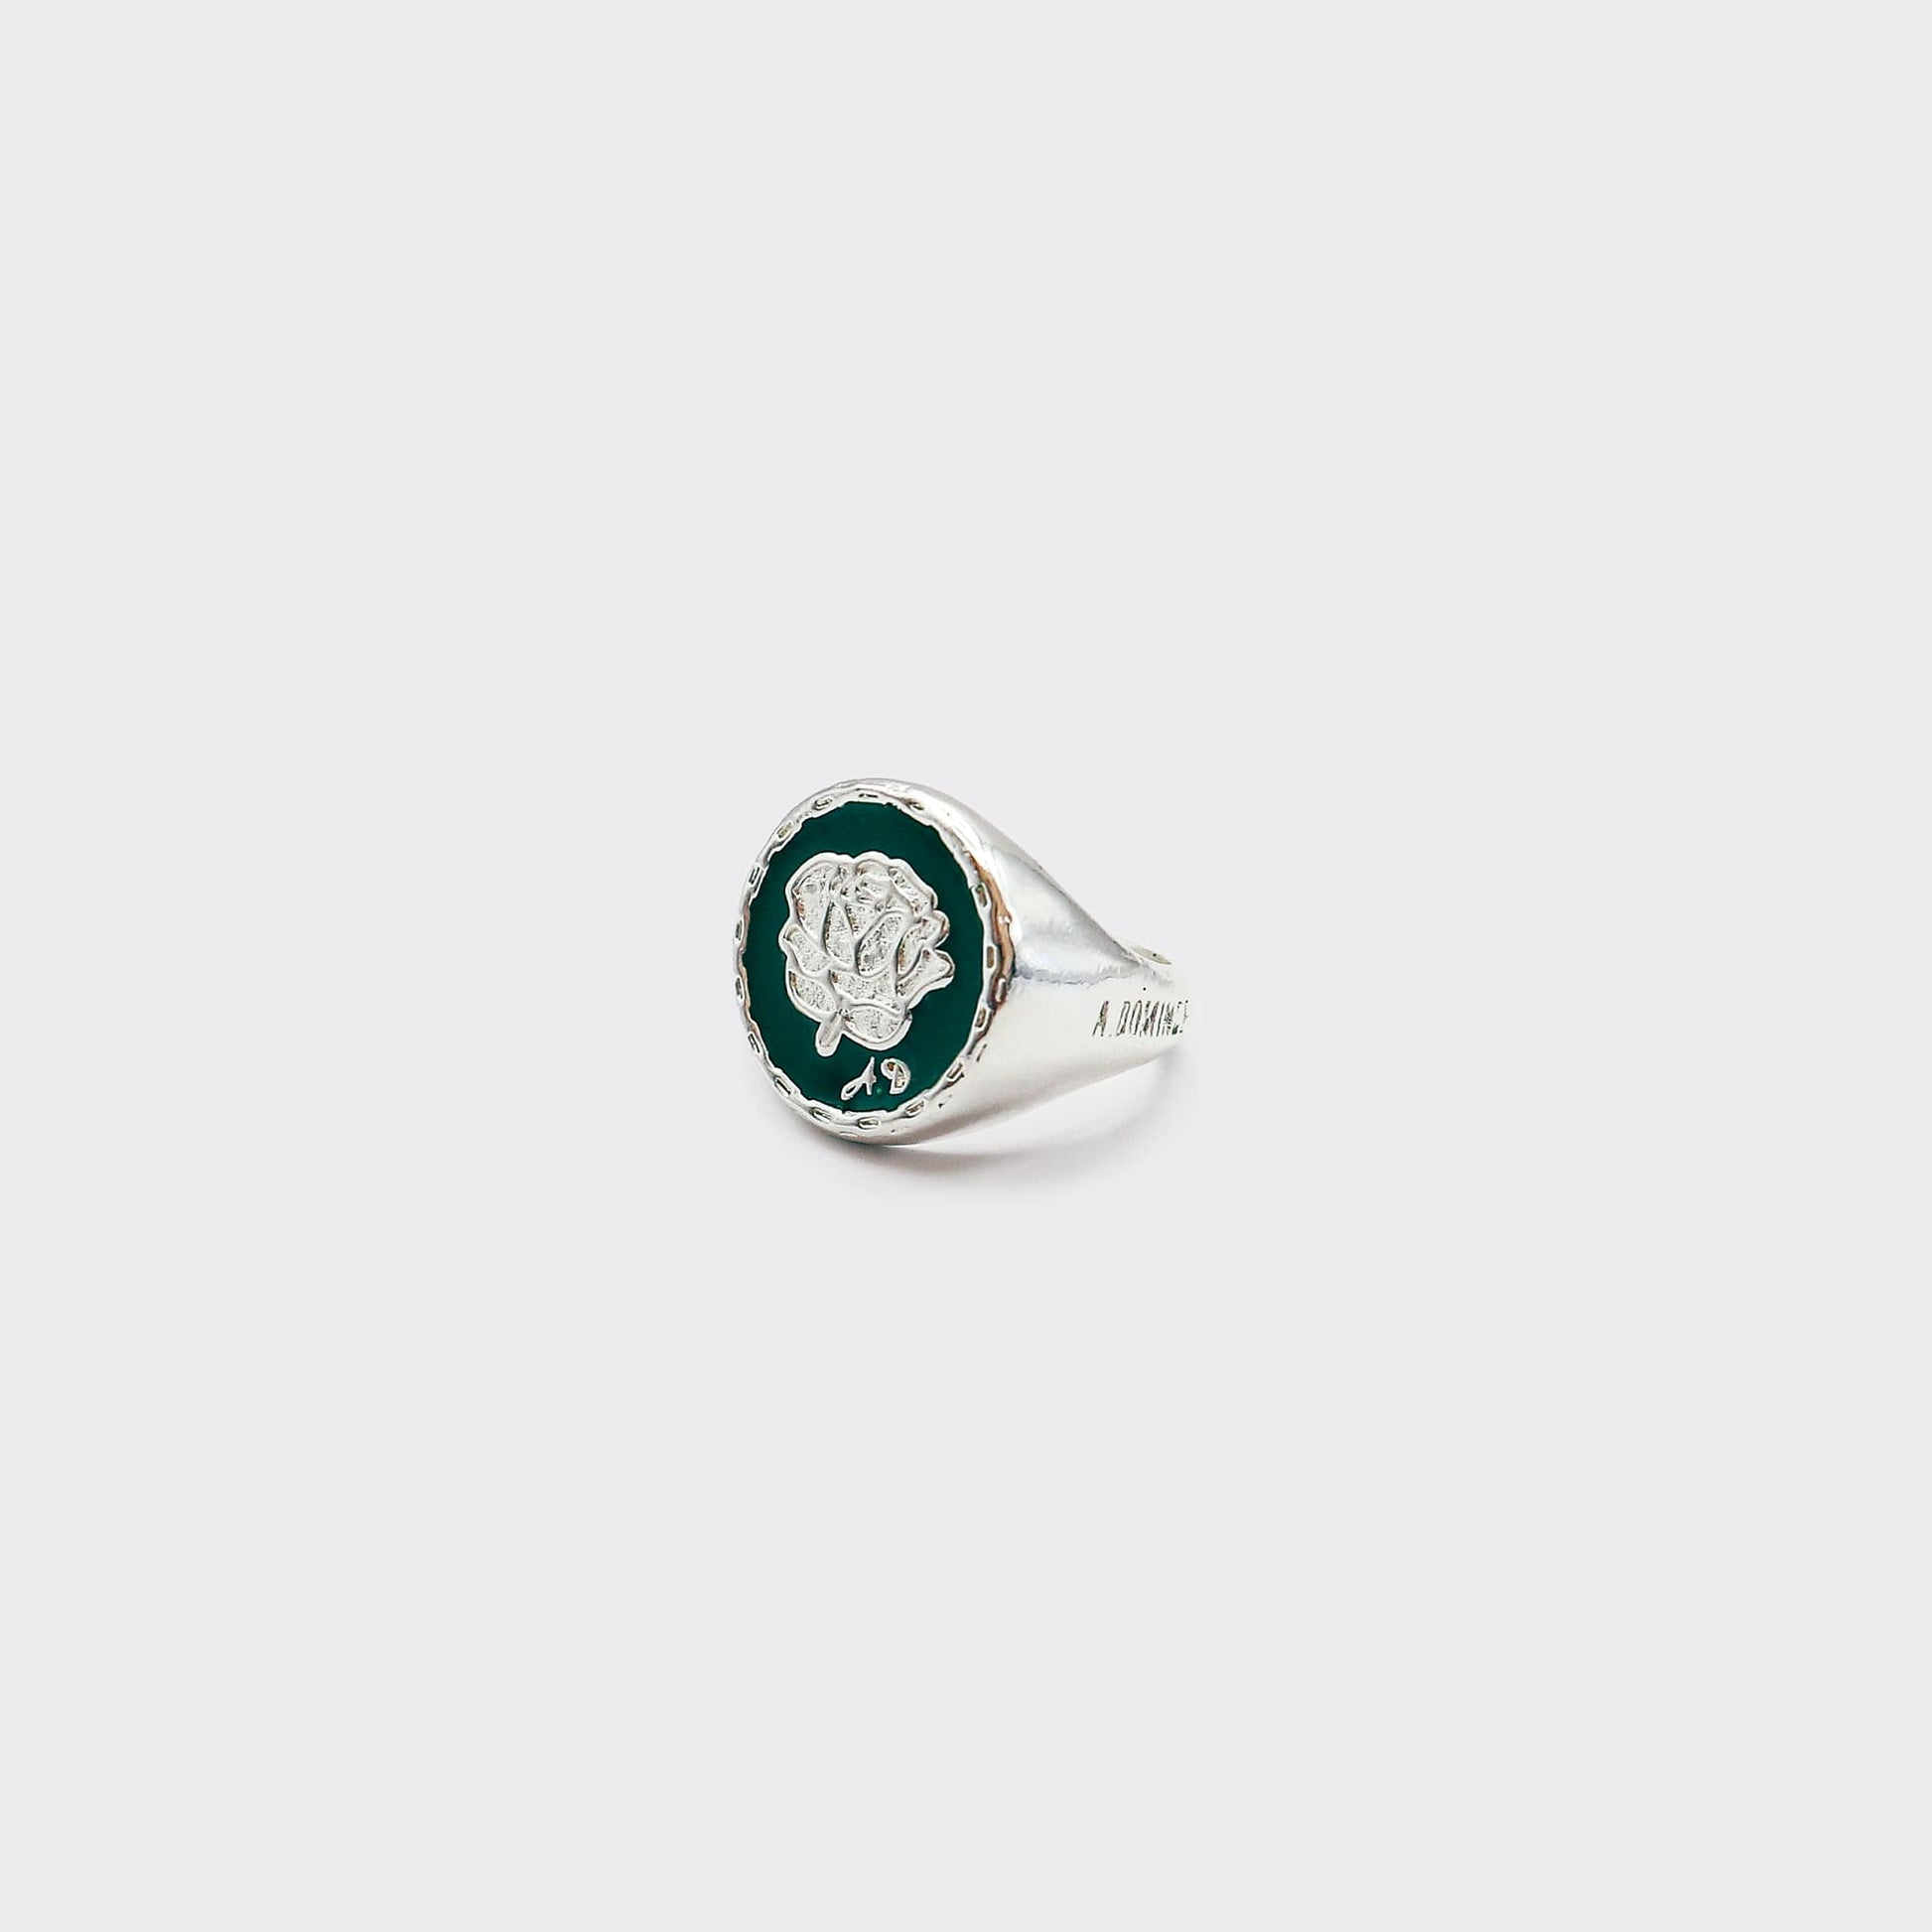 Atelier Domingo's Do's ring is our tribute to the family signet ring. This ring has been designed in France and is made for both men and women. This jewelry is made of a high-quality 925 Sterling silver plating.